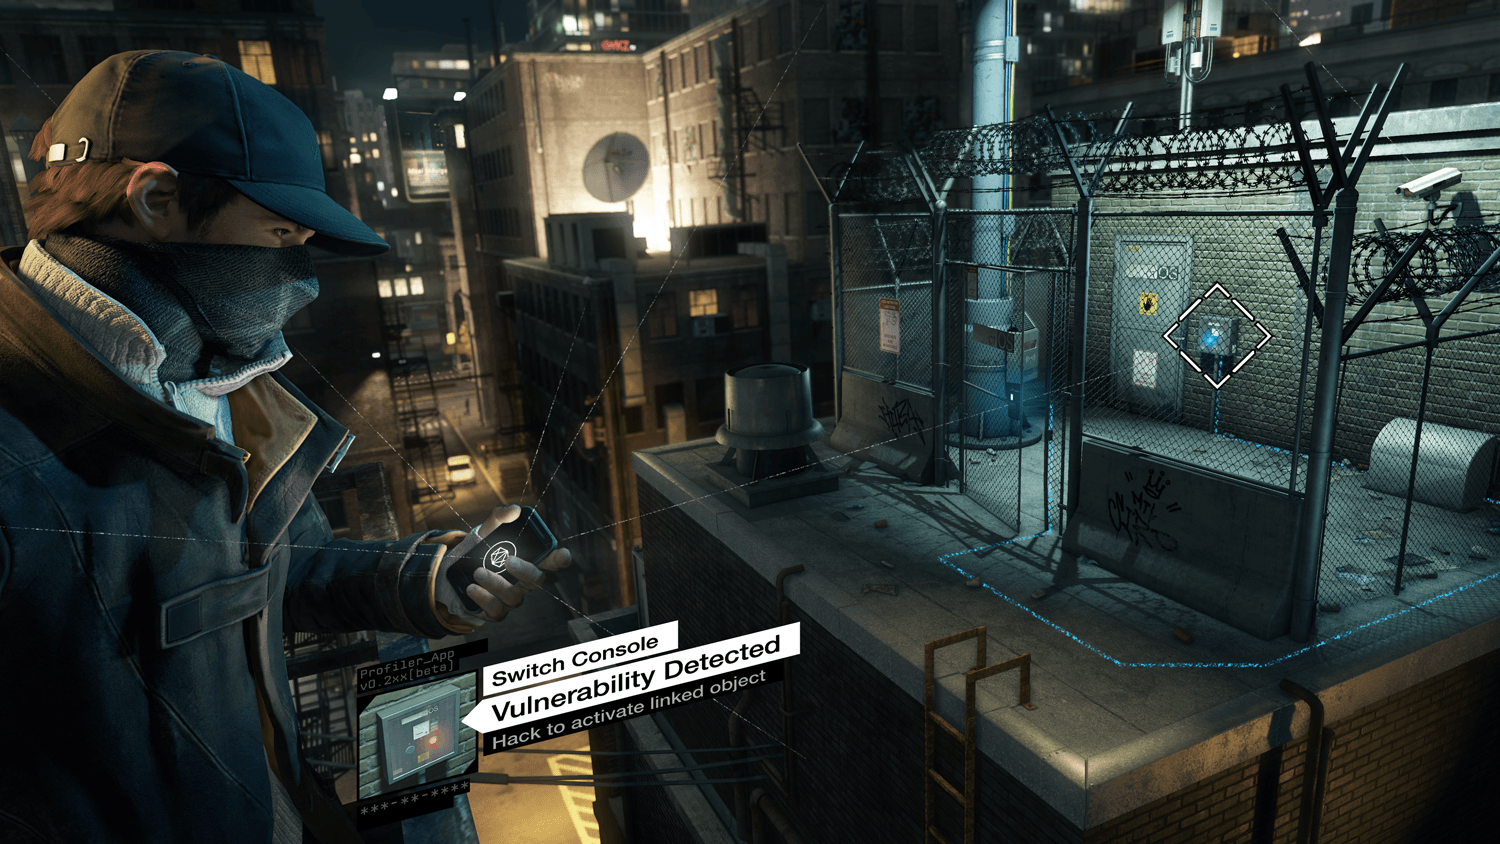 Watch Dogs Guide: Best Skills to Take, Earn Money Fast, Mission